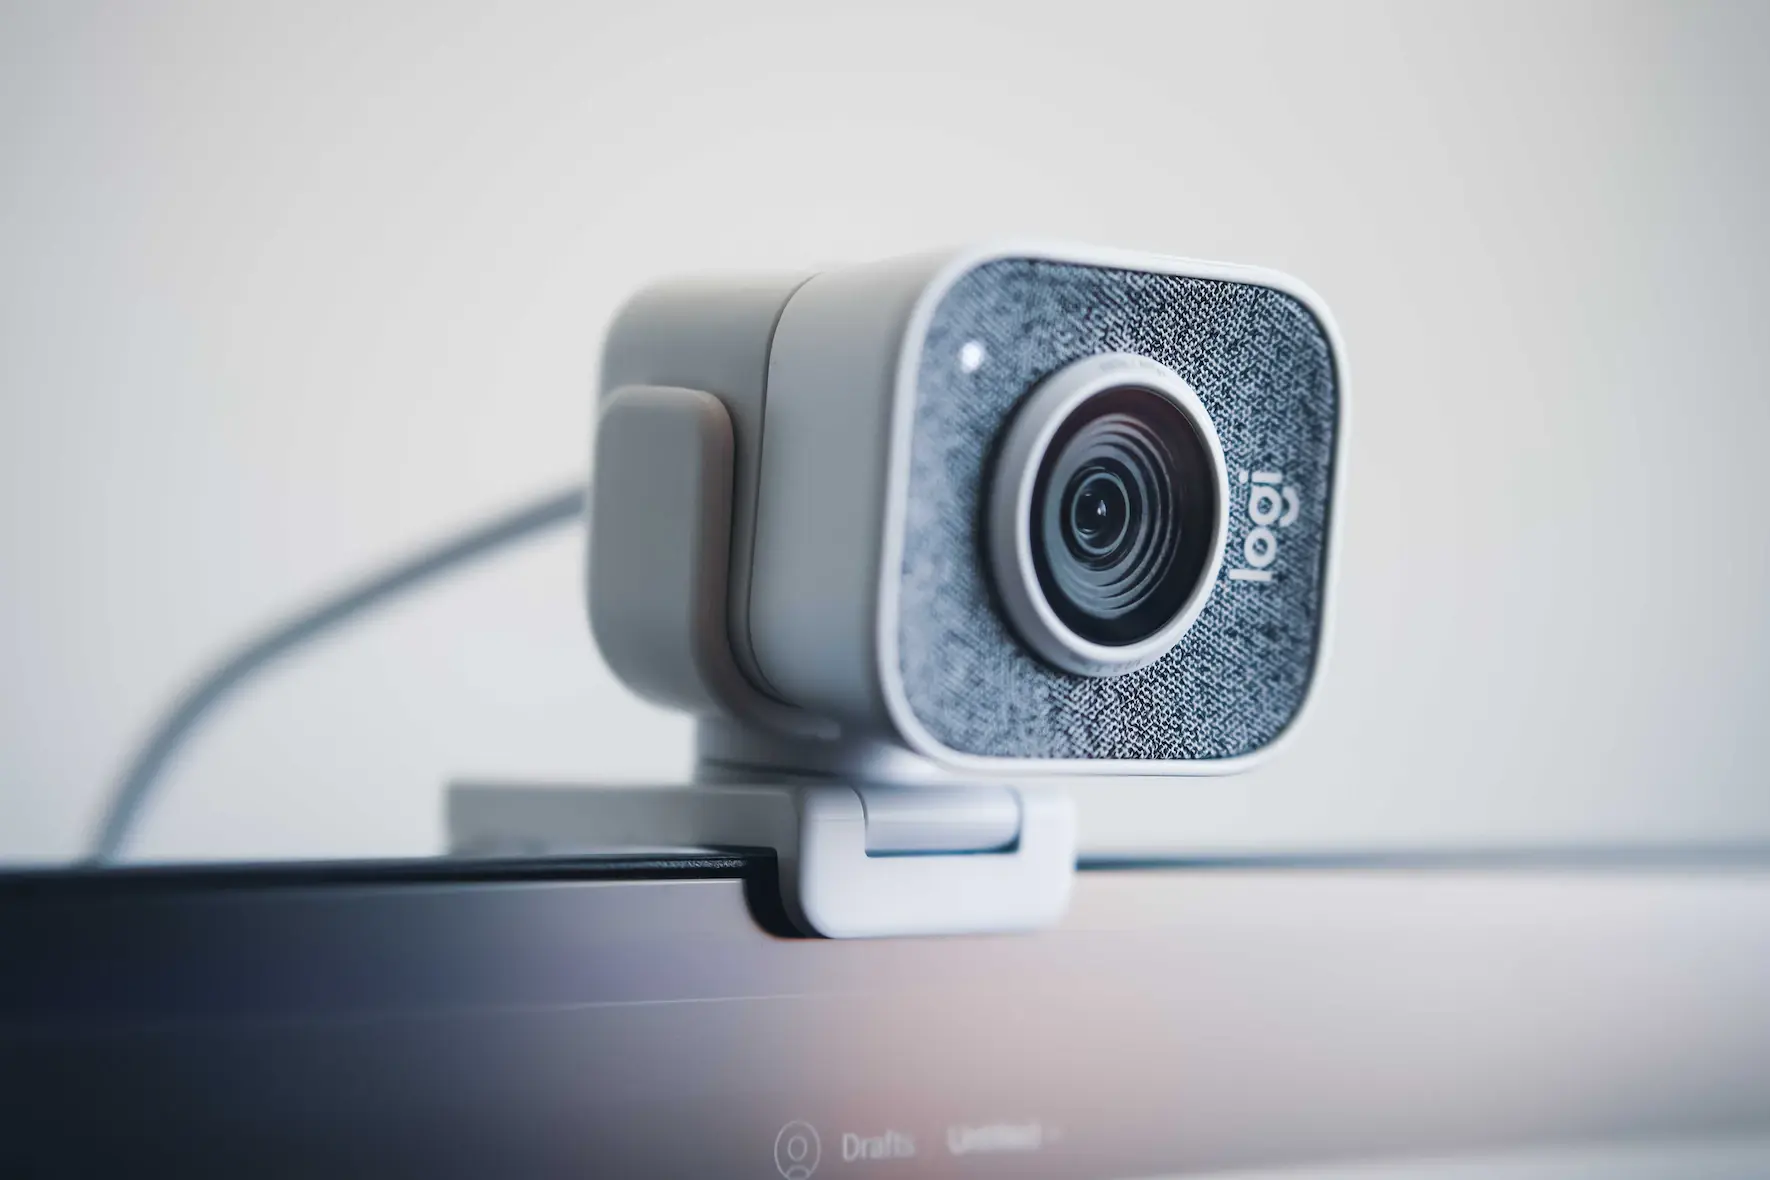 A good webcam and microphones ensure your professionalism when working remotely